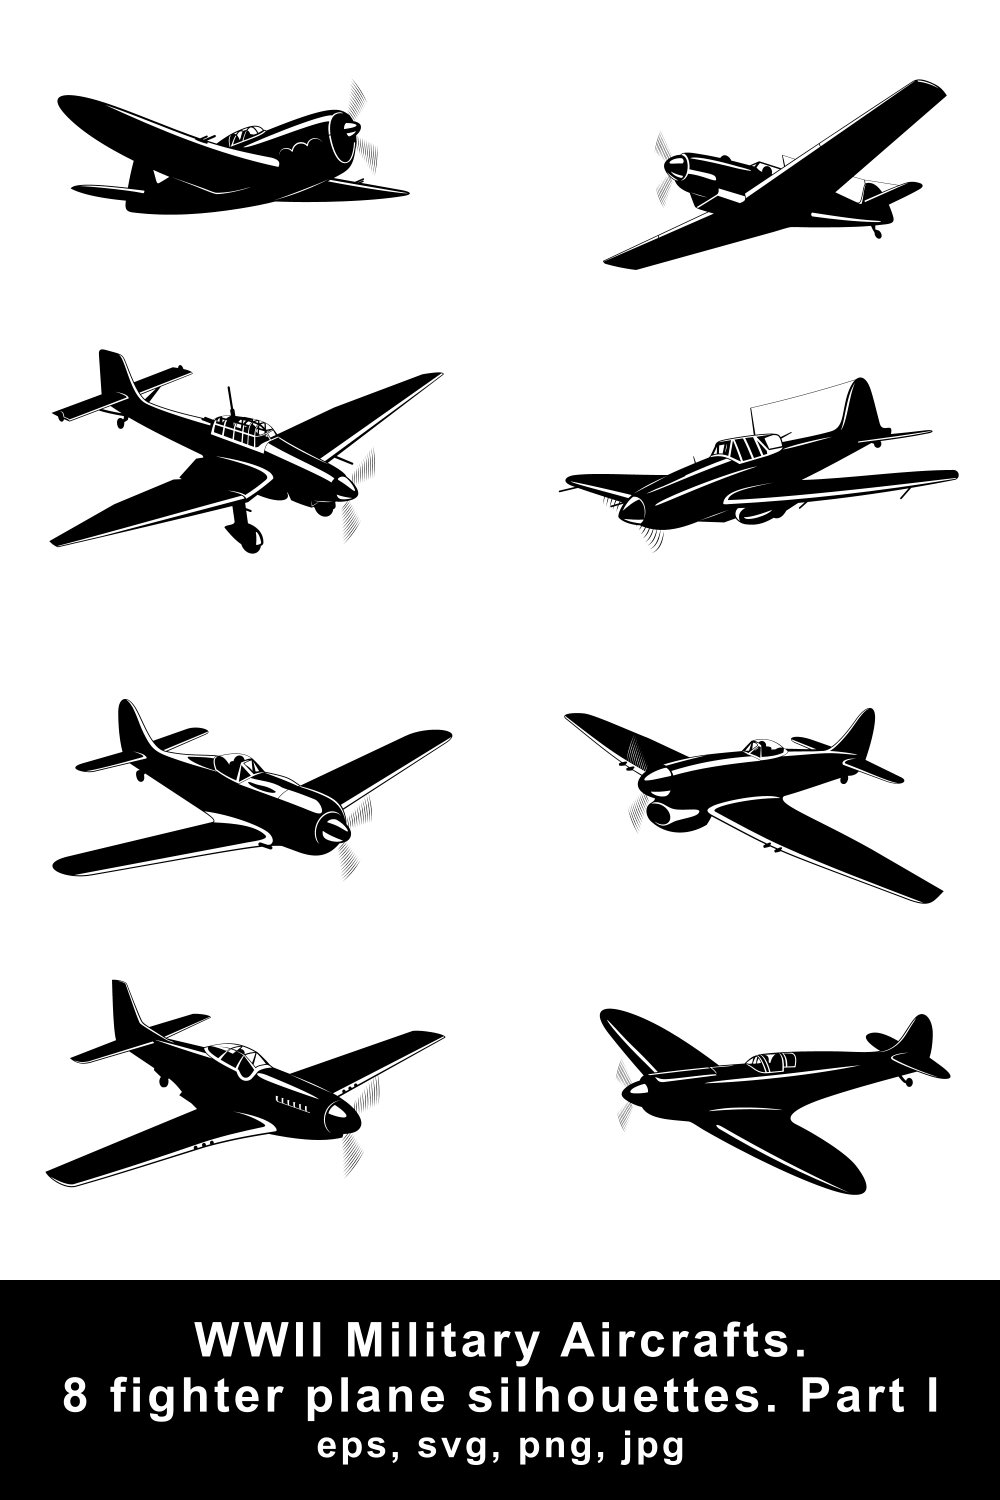 WWII Aircrafts Fighter Planes Silhouettes Design pinterest image.